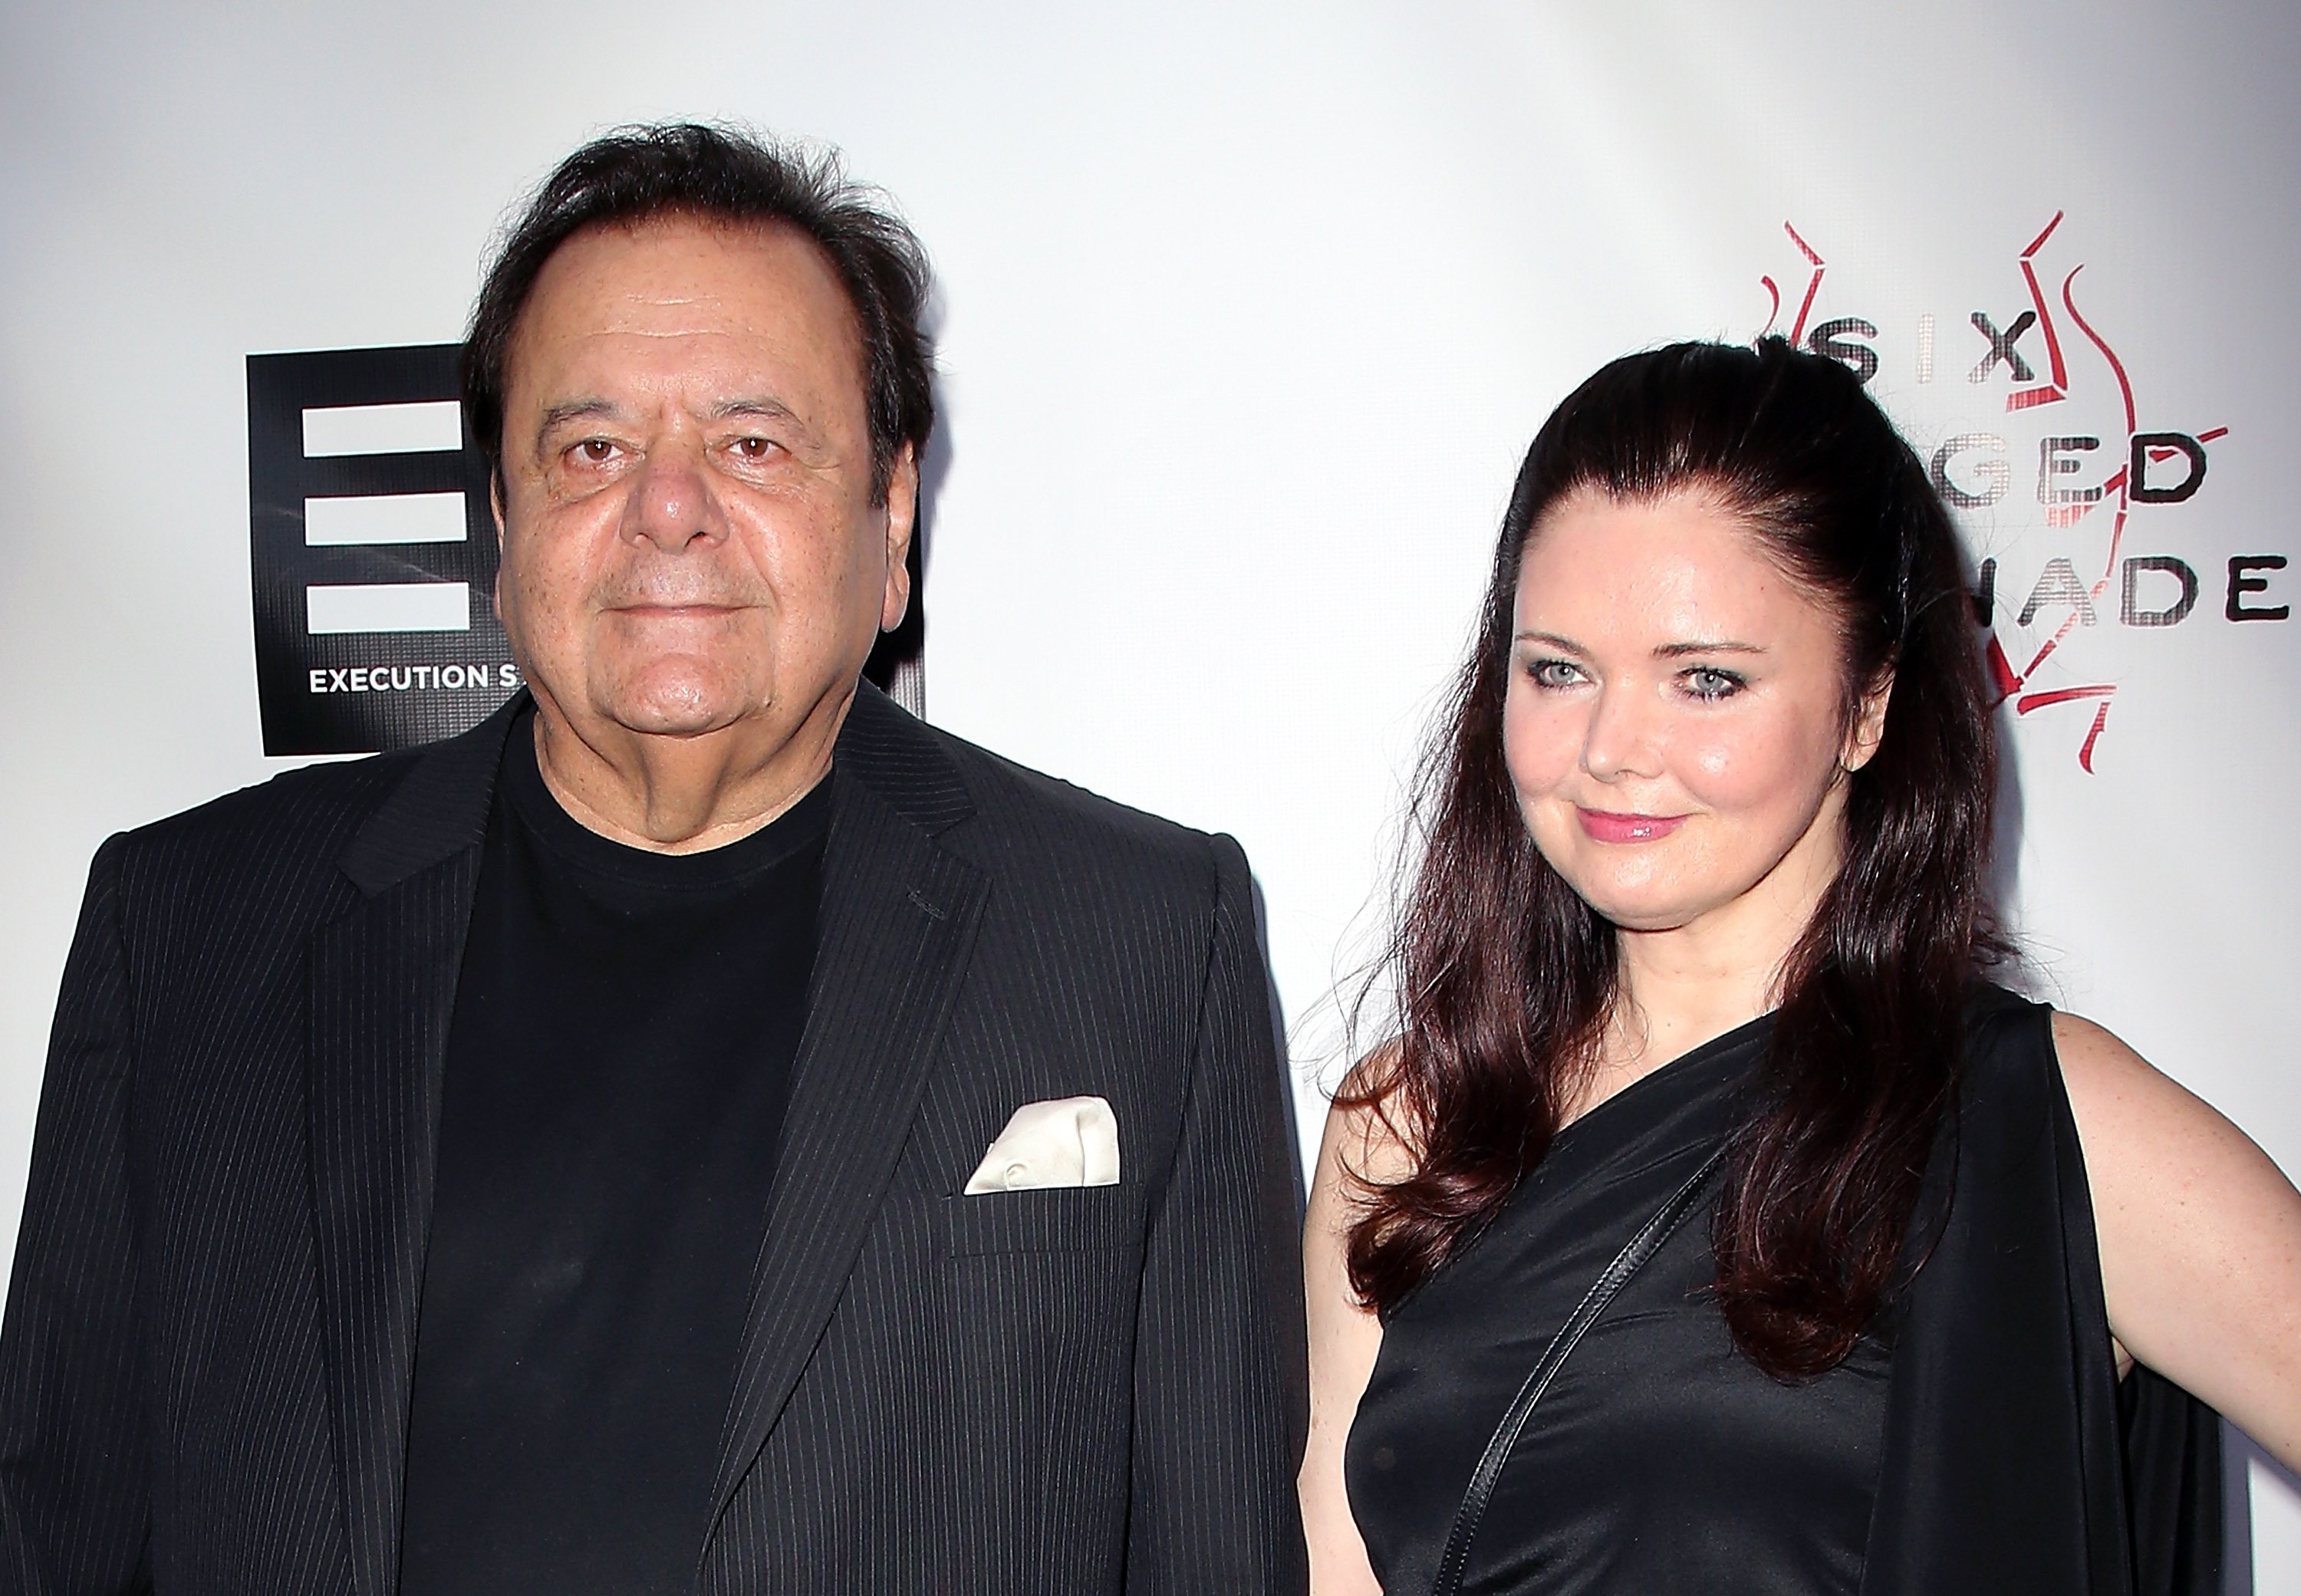 Actor Paul Sorvino (L) and wife Dee Dee Sorvino attend the premiere of "Alleluia! The Devil's Carnival" at the Egyptian Theatre on August 11, 2015 in Hollywood, California. | Source: Getty Images